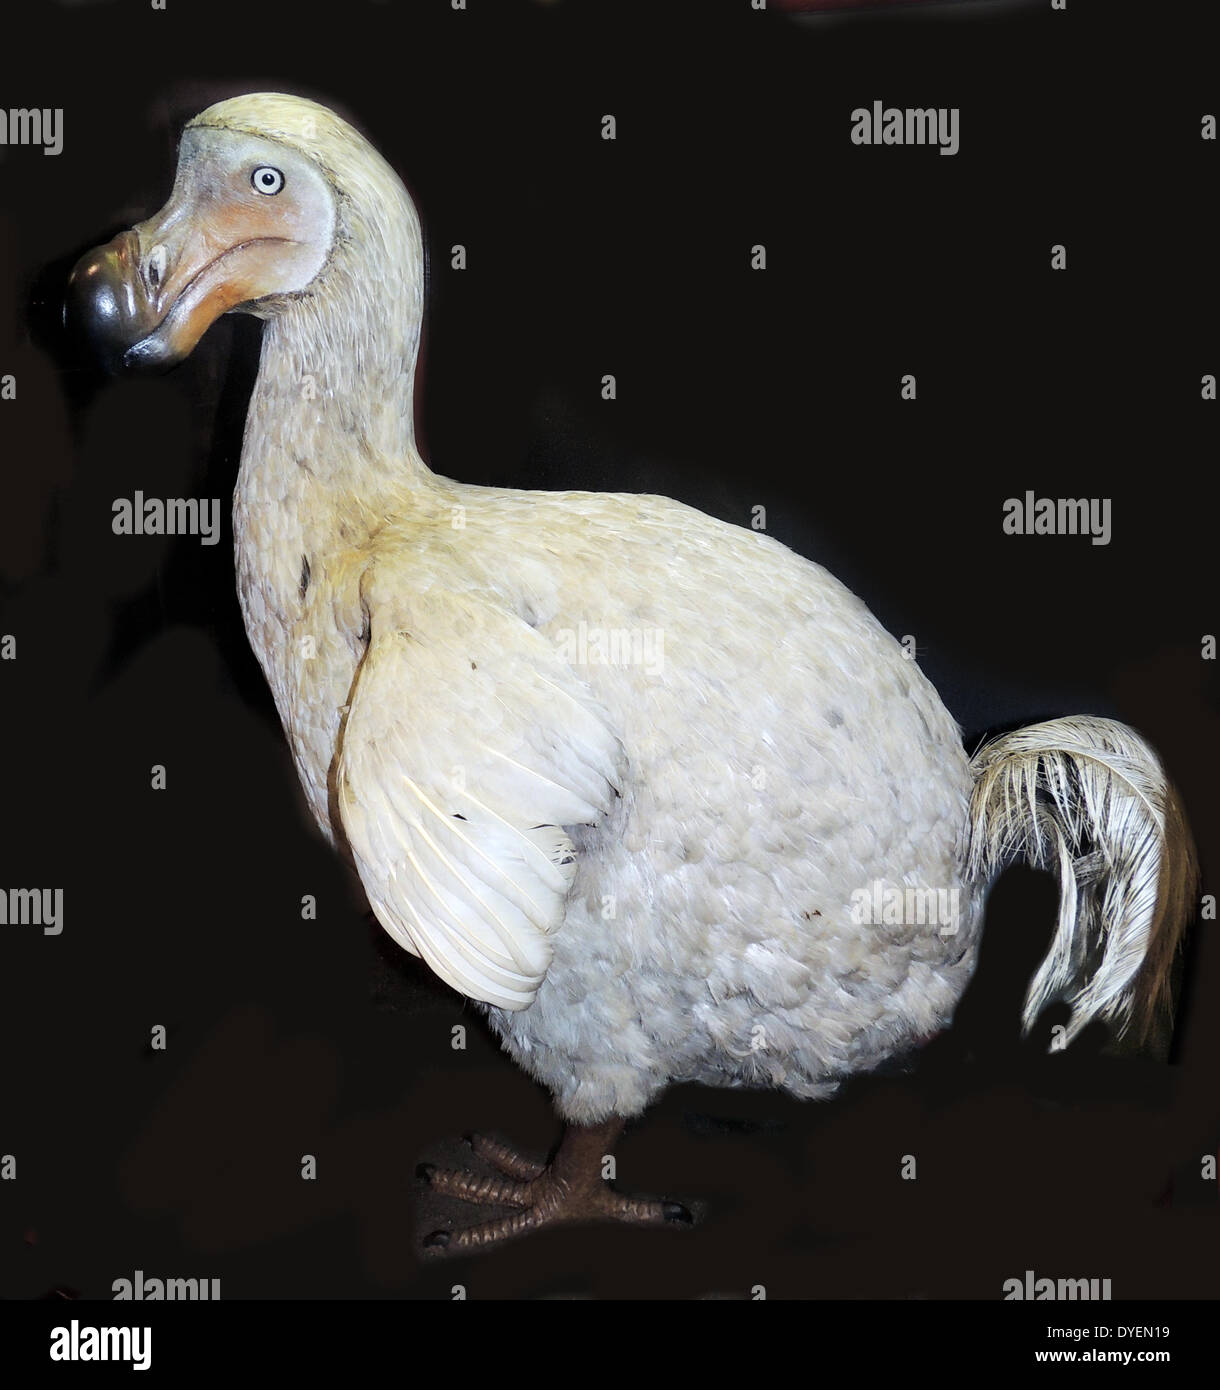 The Dodo (Raphus cucullatus) an extinct flightless bird that was endemic to the island of Mauritius, east of Madagascar in the Indian Ocean. Its closest genetic relative was the also extinct Rodrigues Solitaire, the two forming the subfamily Raphinae of the family of pigeons and doves. Stock Photo